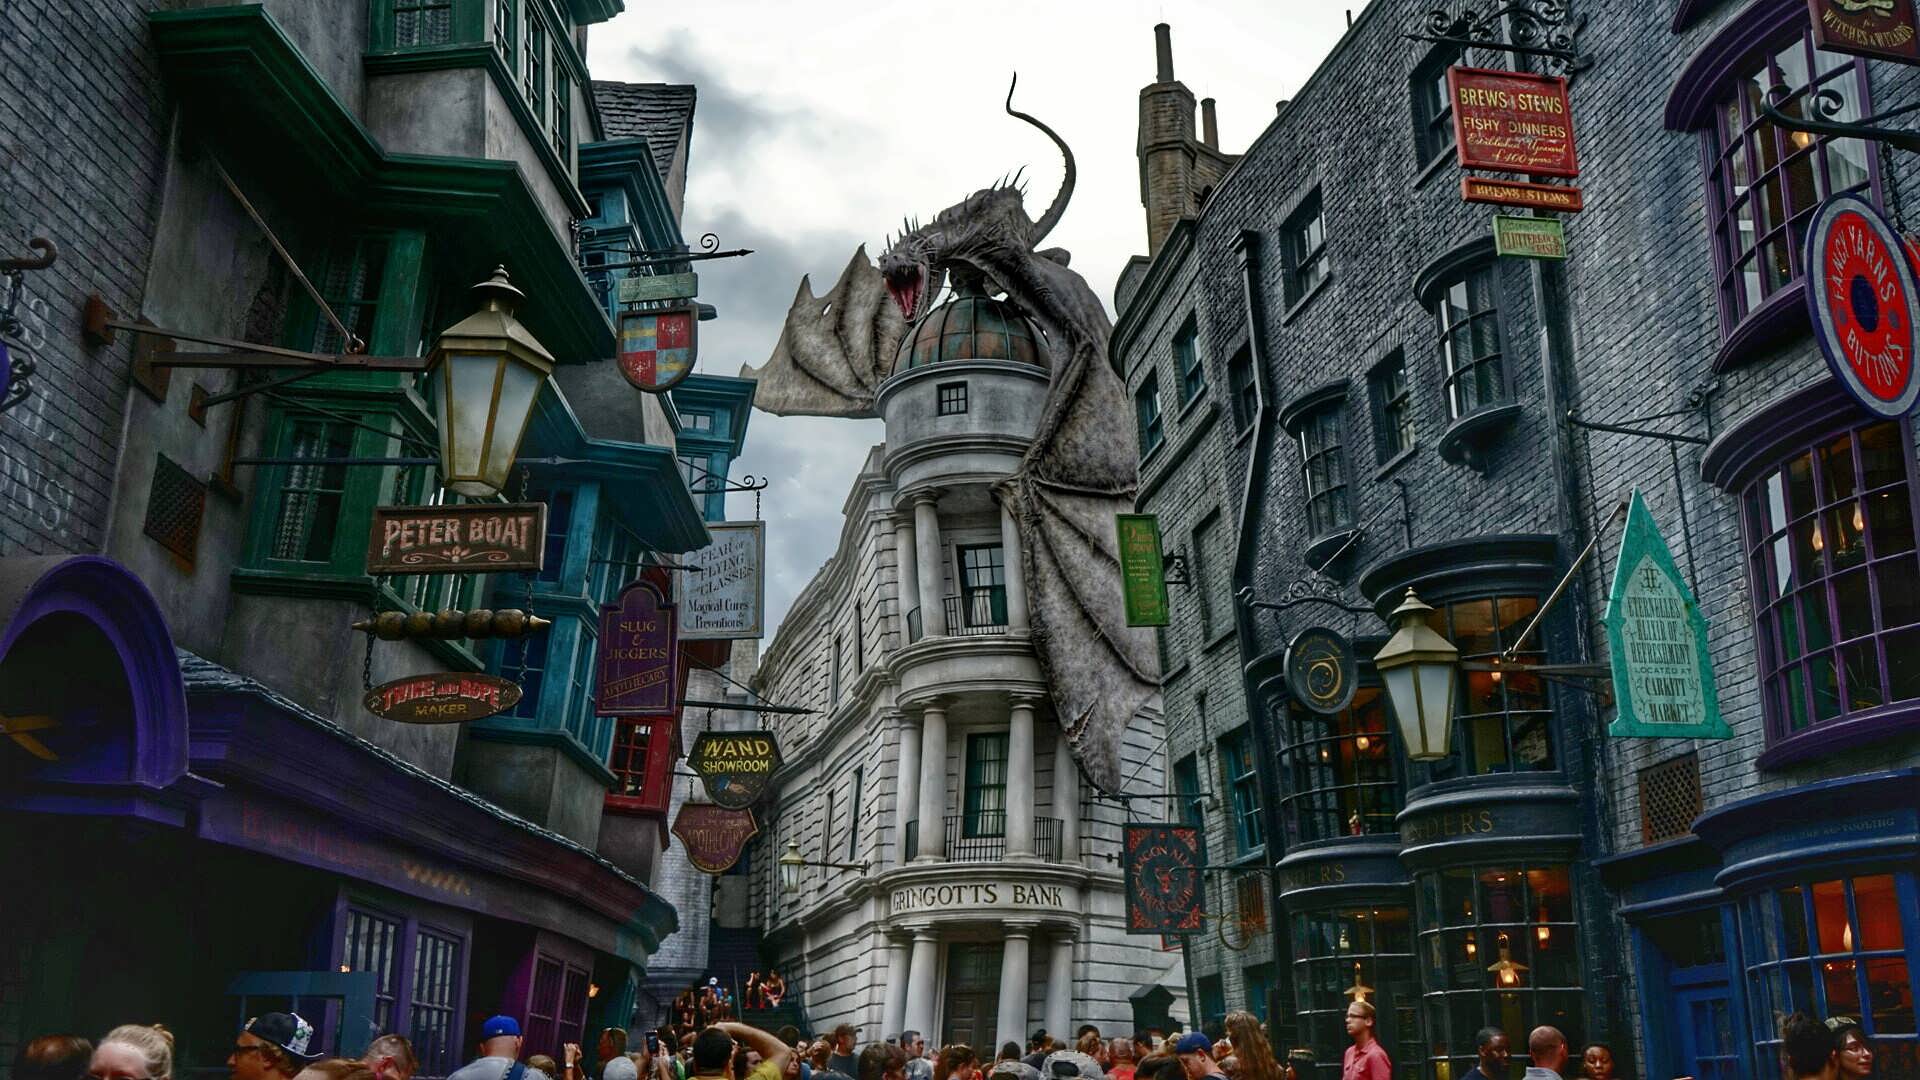 Early Admission to The Wizarding World of Harry Potter (at Universal